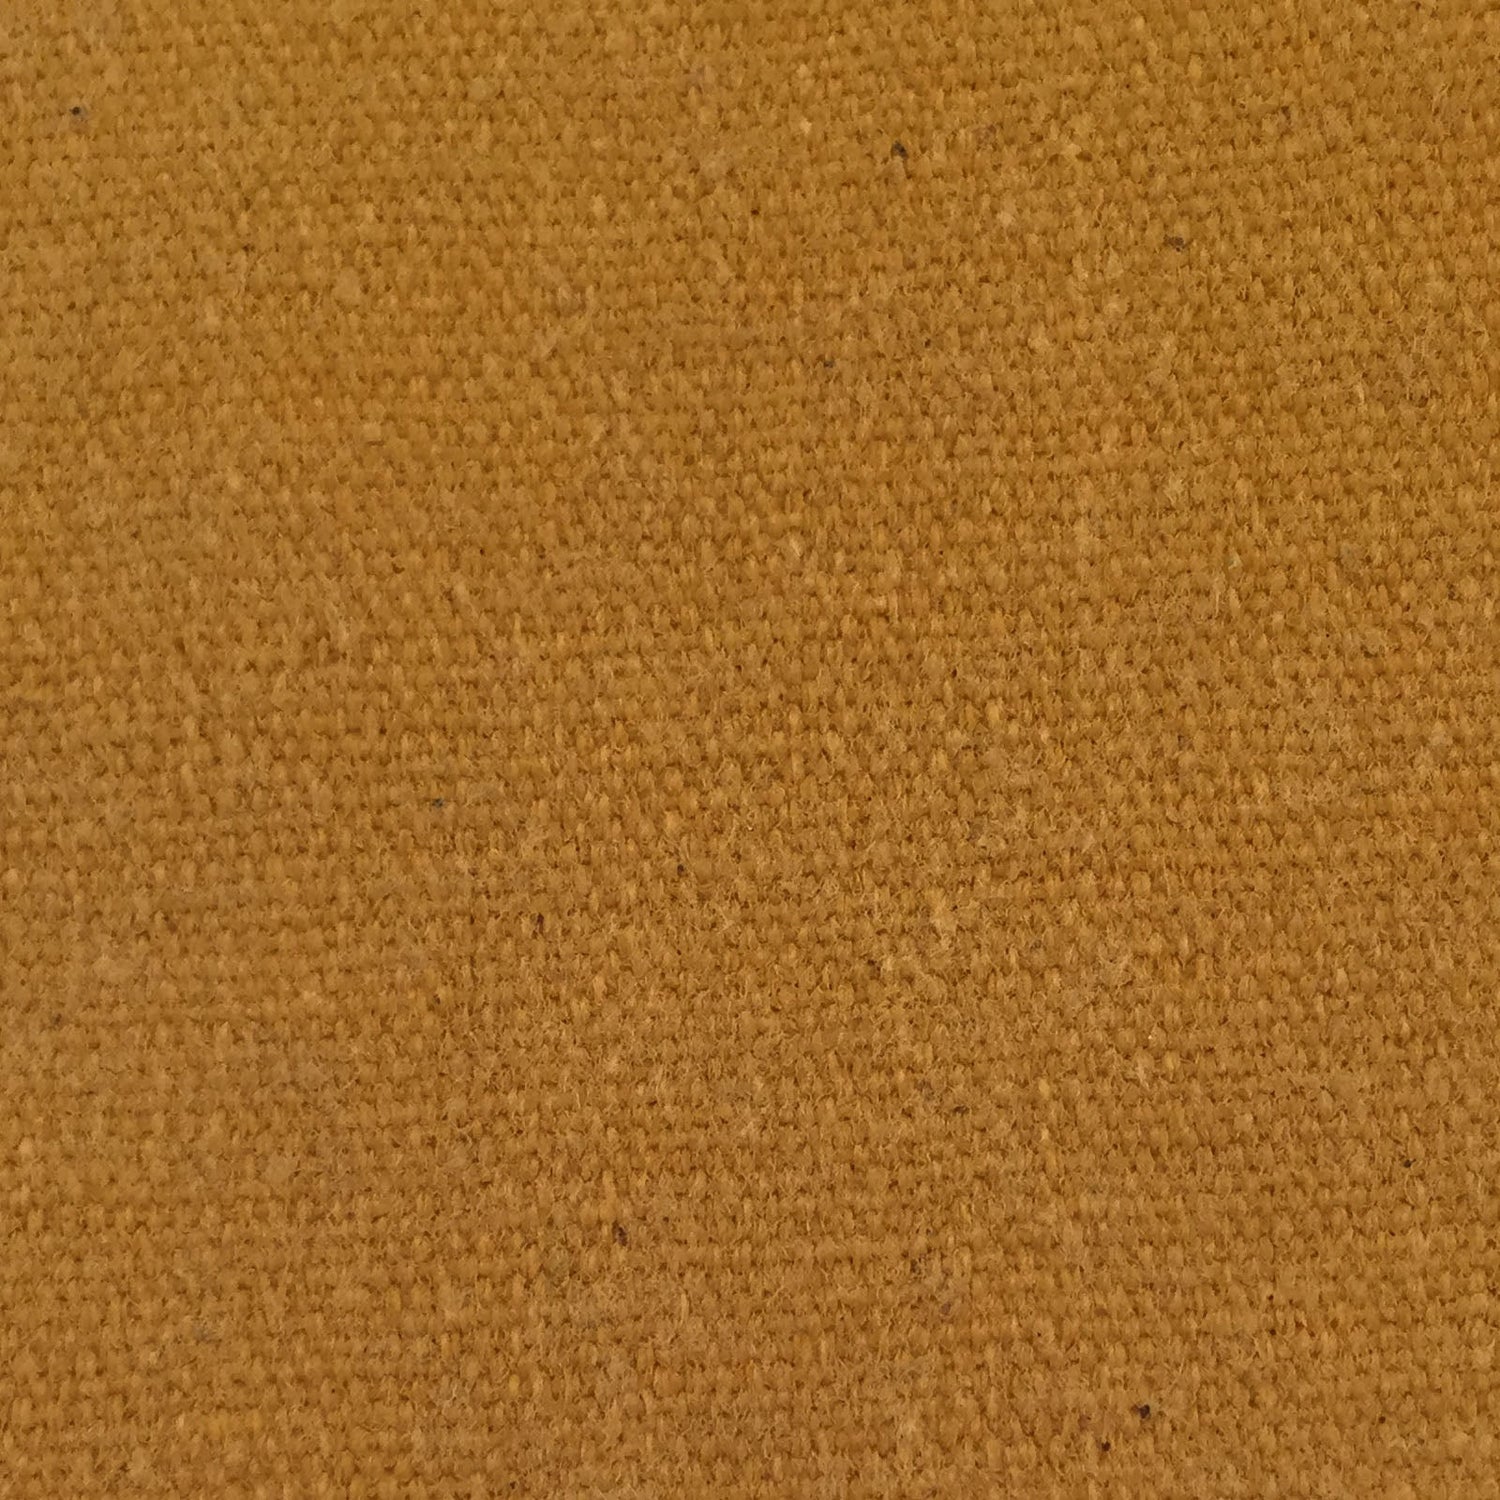 16 oz Canvas Treated Water Resistant Fabric [60" x 1 Yard]